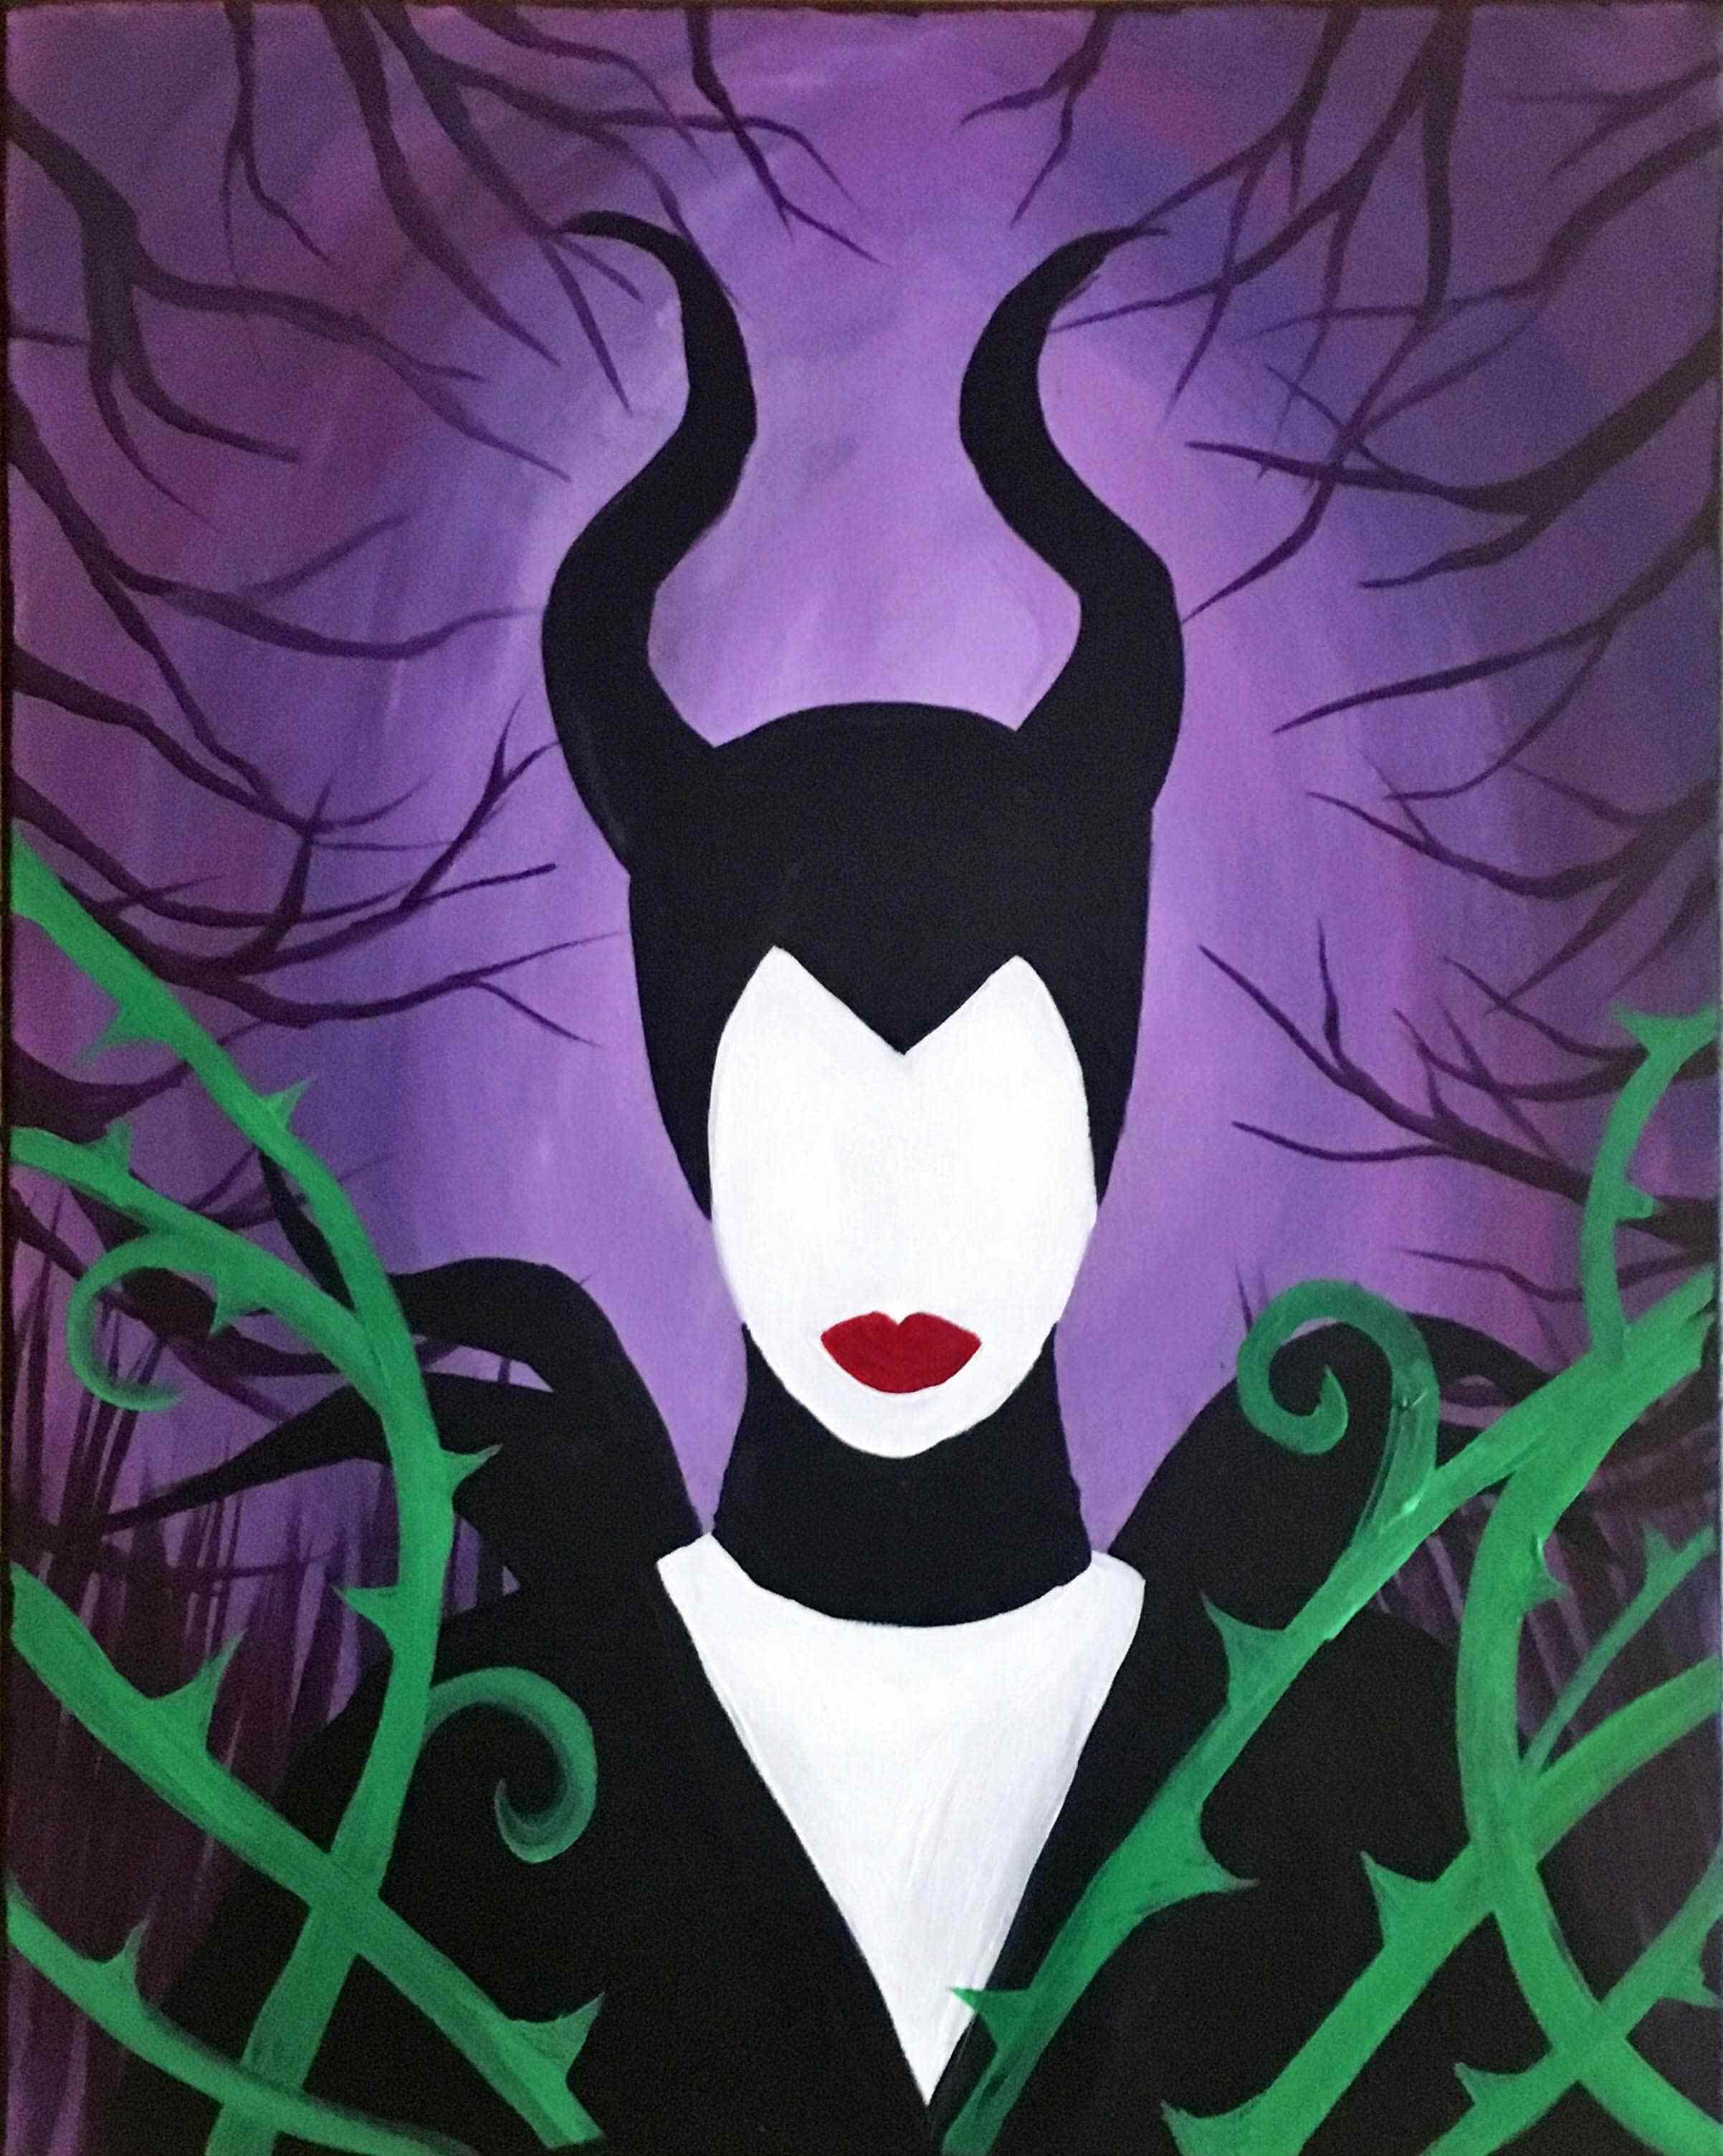 A Magnificent Maleficent  experience project by Yaymaker